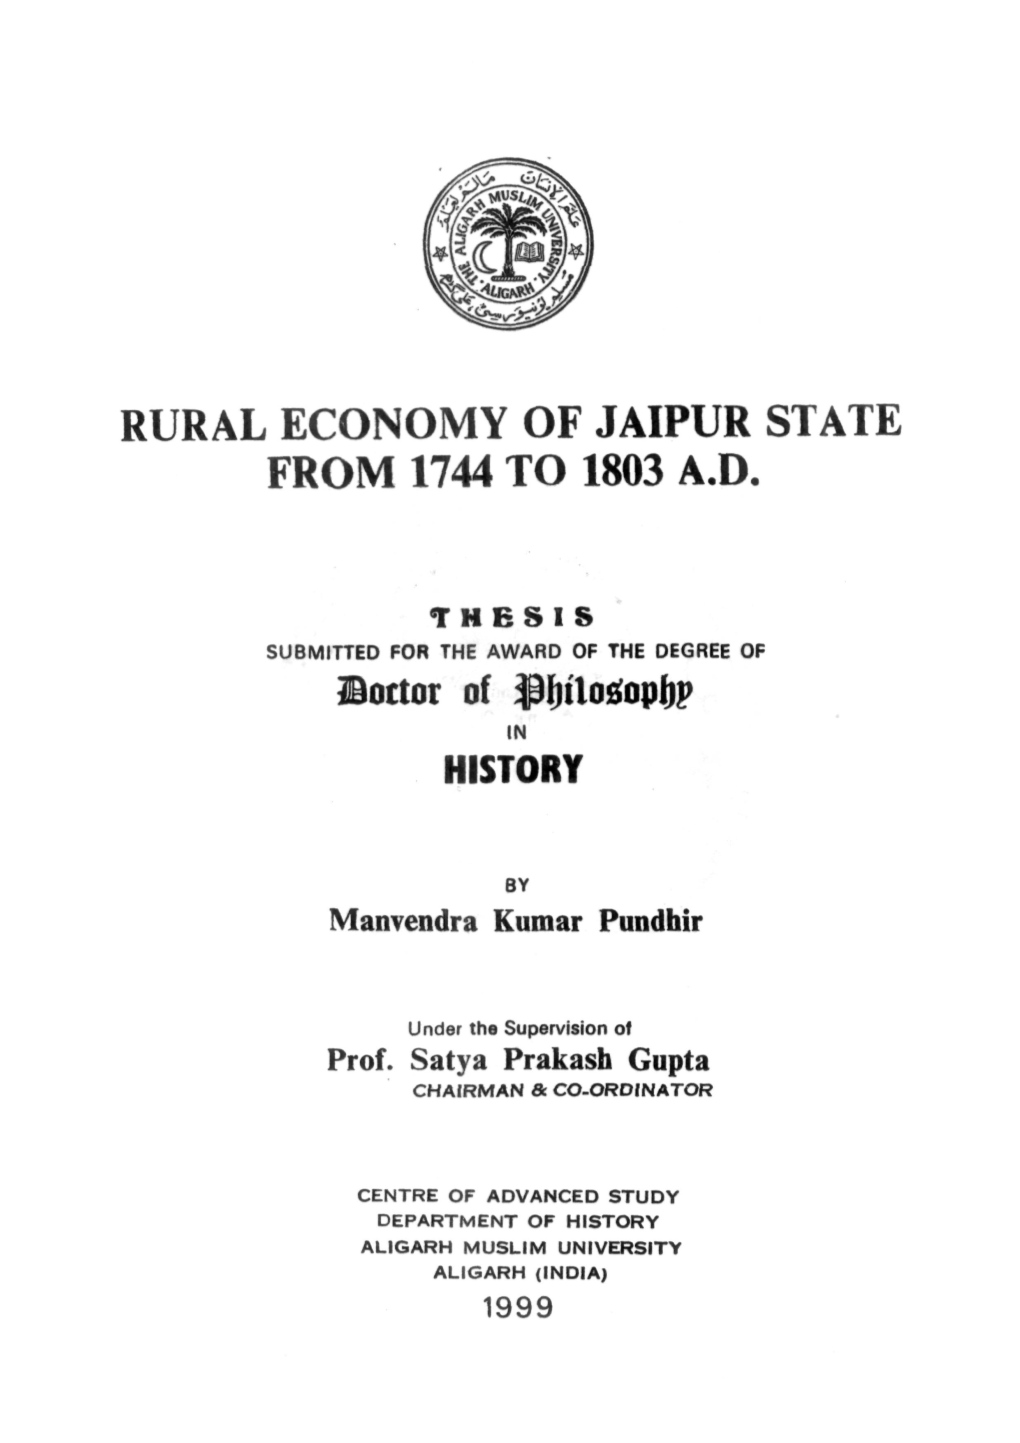 Rural Economy of Jaipur State from 1744 to 1803 A.D